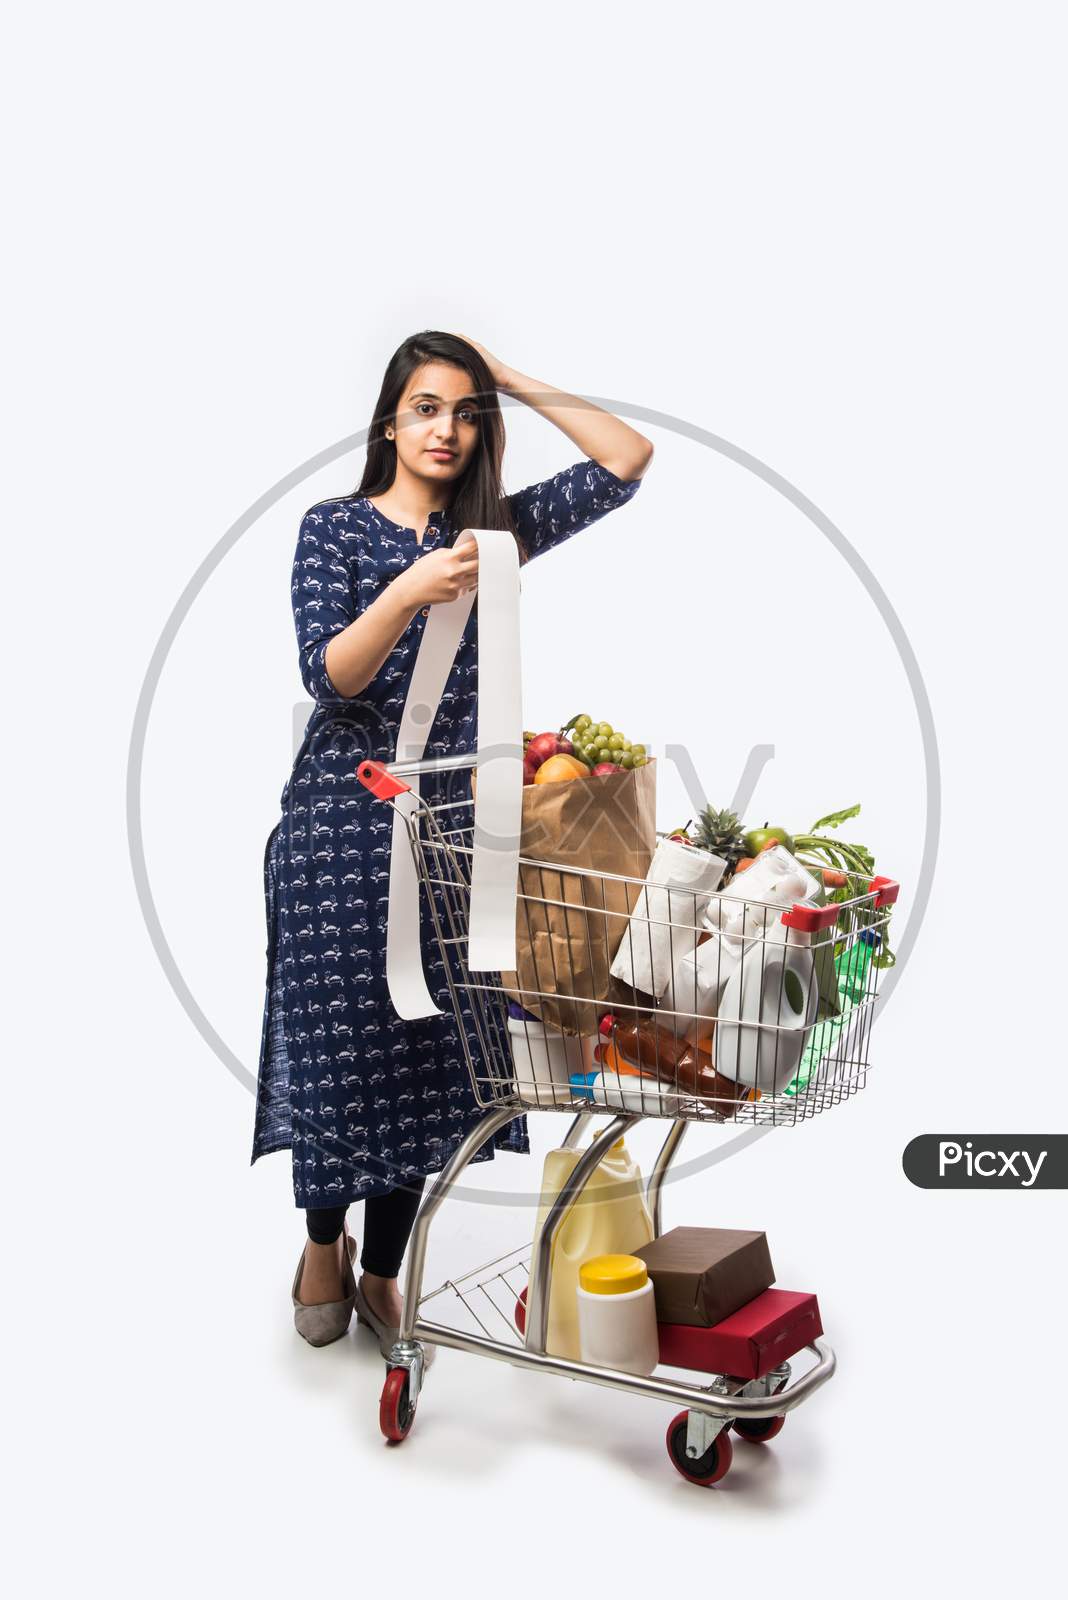 Indian woman or girl with shopping cart